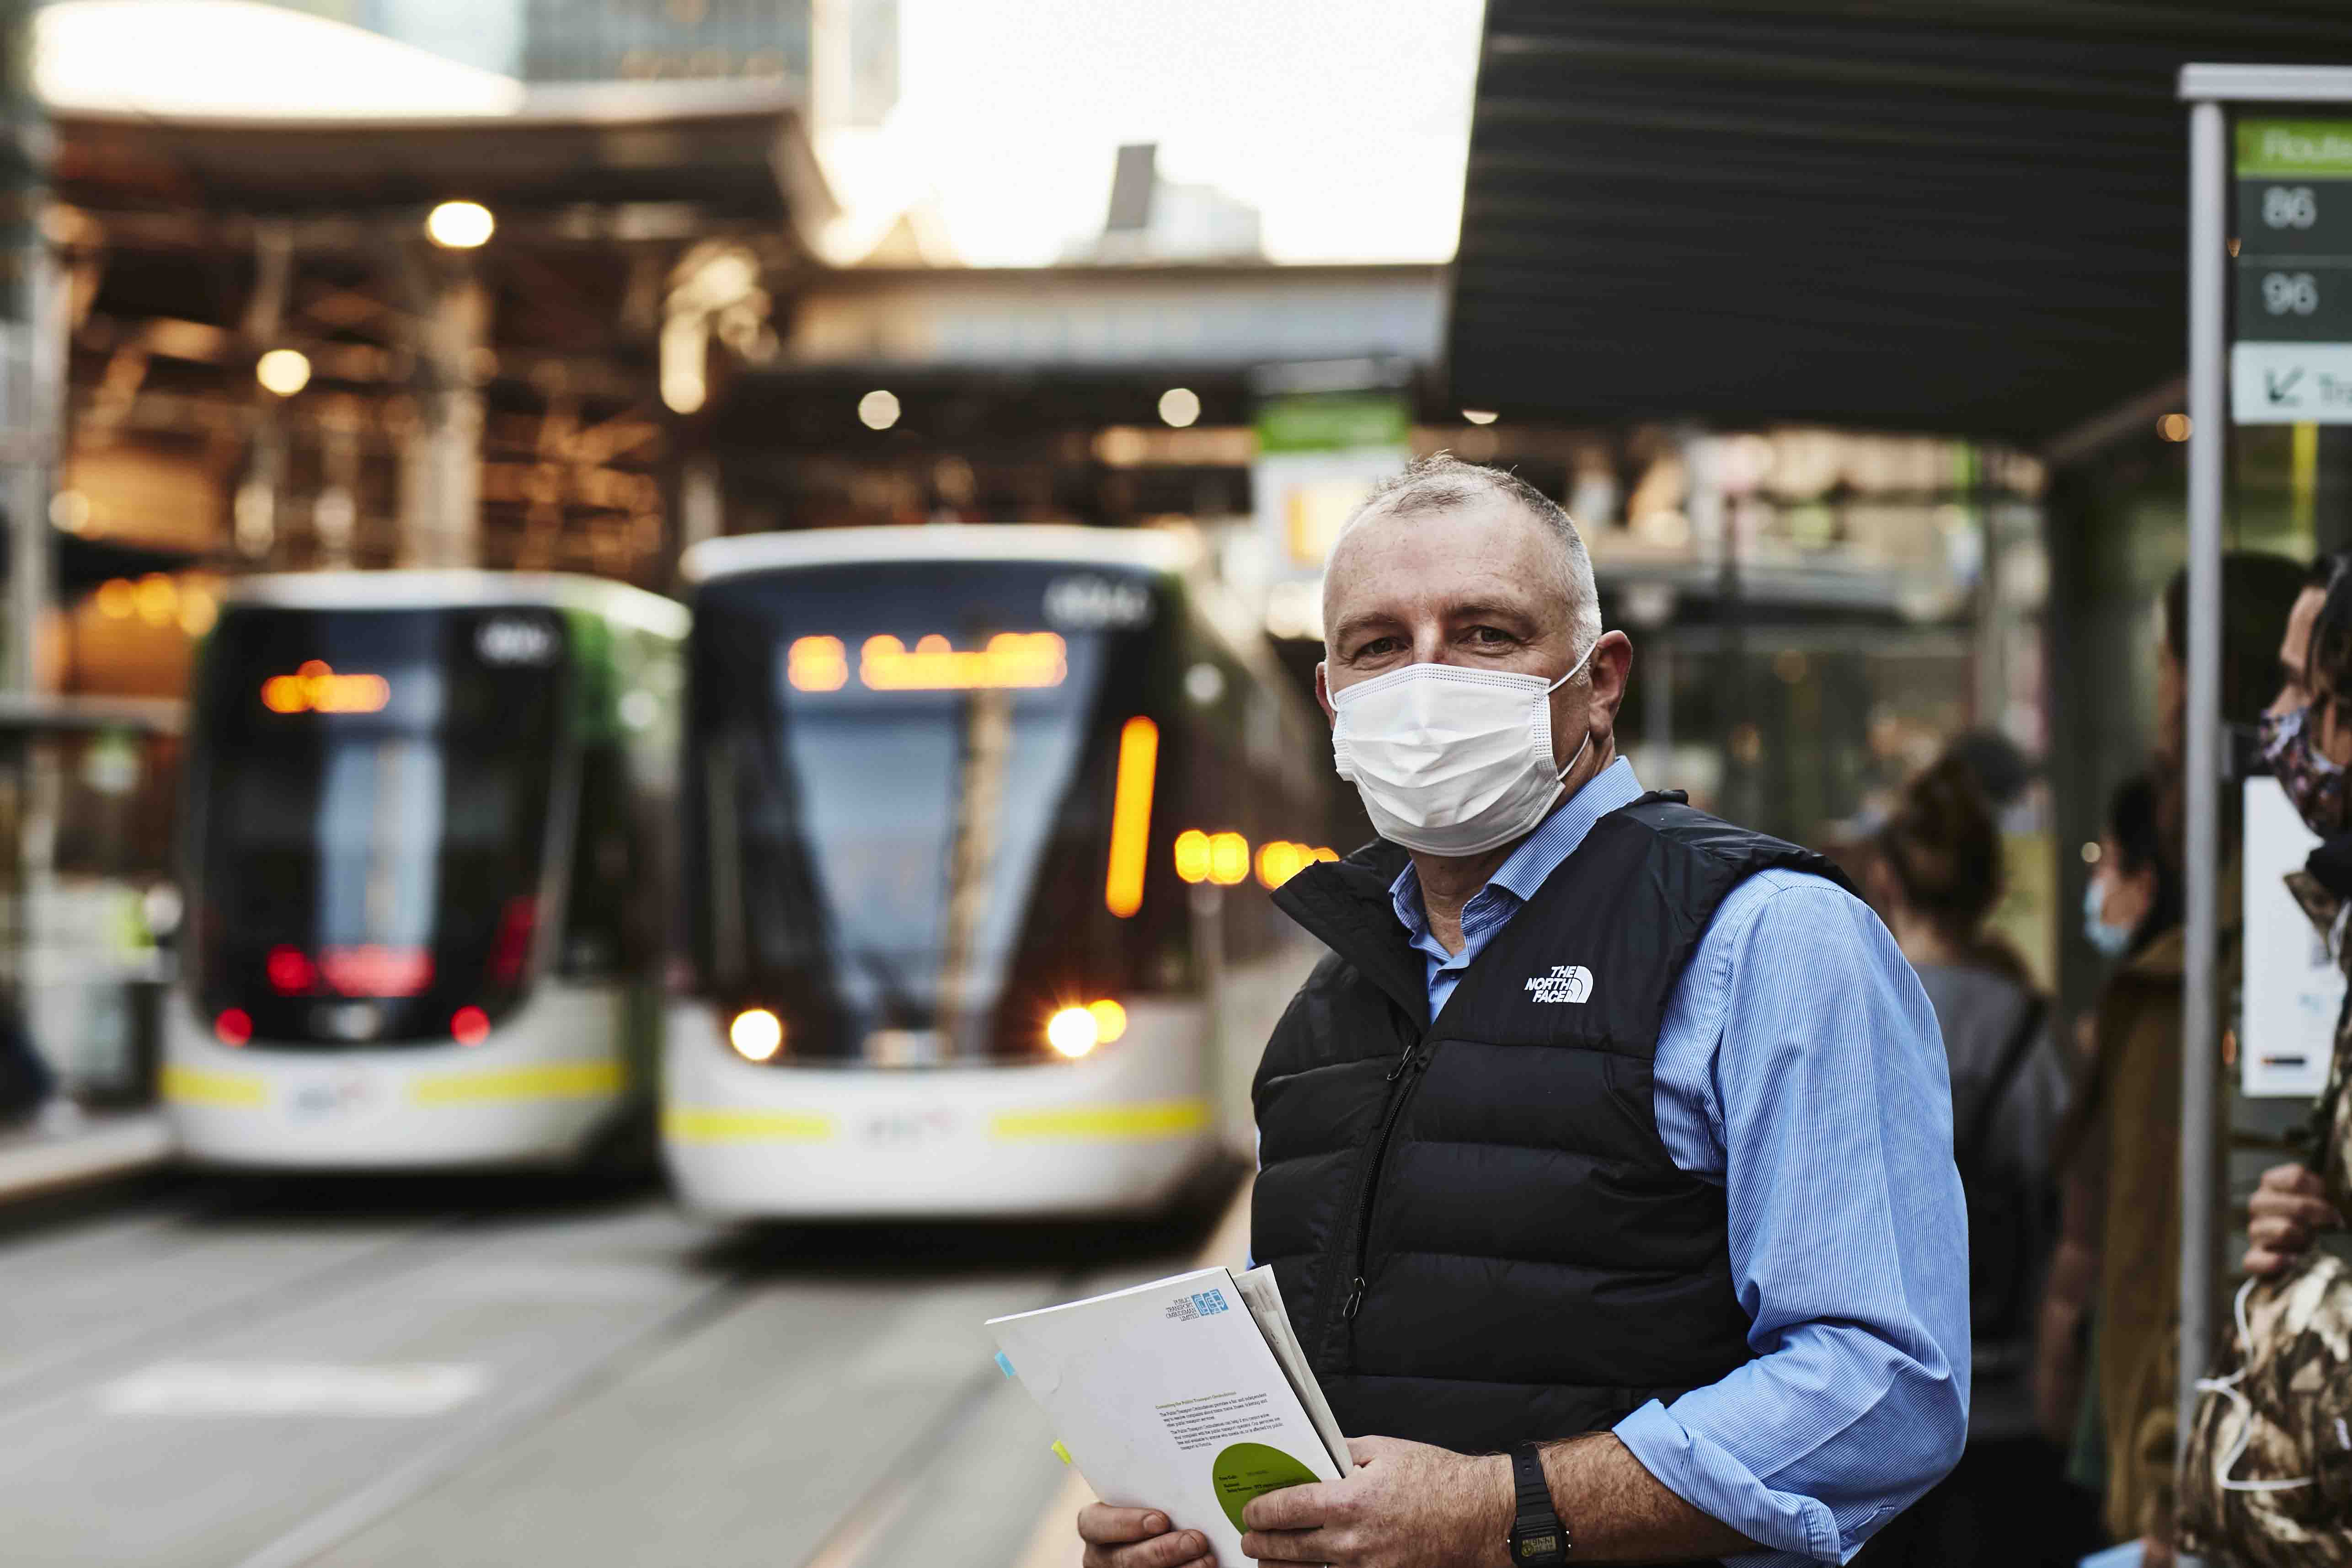 Image is a landscape orientation colour photograph showing Public Transport Ombudsman, Simon McKenzie, waiting at a tram stop in the Melbourne CBD. Simon is a middle-aged Caucasian man with closely cropped grey hair. He is wearing a white facemask and a black puffer vest over a light blue shirt that is open at the collar and rolled-up at the sleeves. He holds some papers in his hands in front of him. In the background and to his left are two trams. The background of the image is blurred from the camera’s depth-of-field.